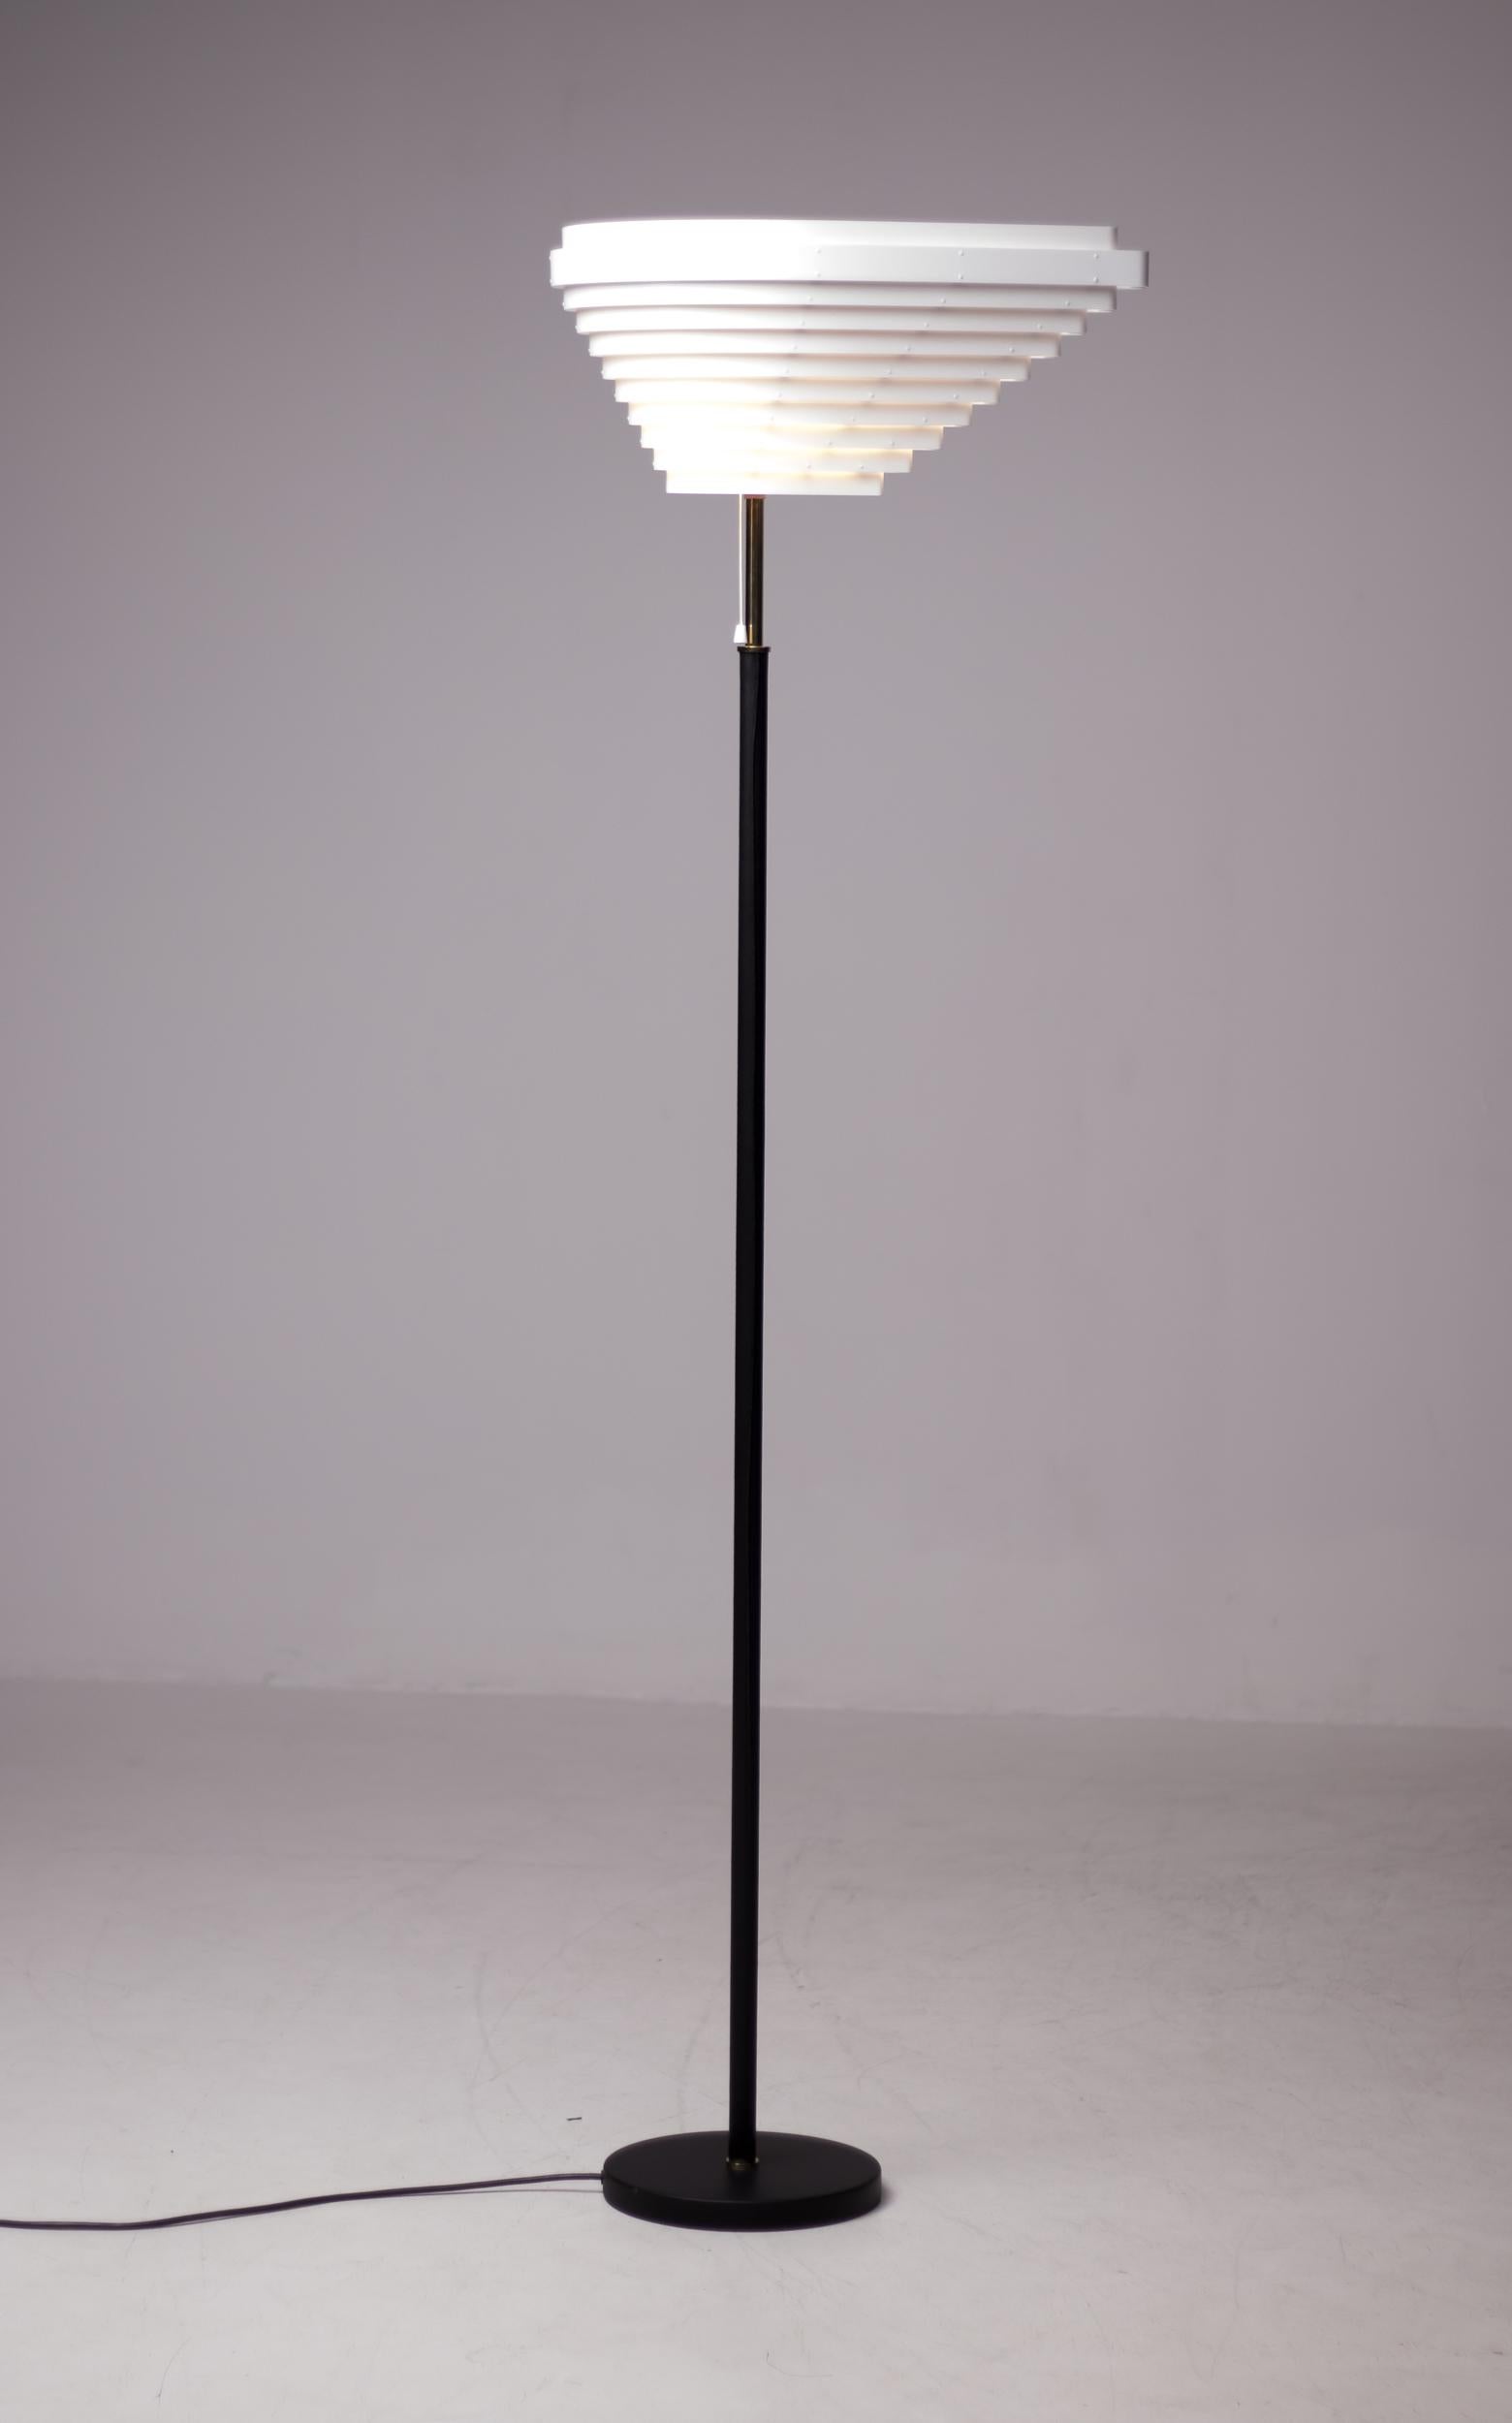 Angel Wing floor lamp model A805, originally designed by Alvar Aalto in 1954.
The base and stem have been wrapped in hand sewn black leather, polished brass details. 
Manufactured by Artek, Finland. White enameled louvered metal shade. 
Marked